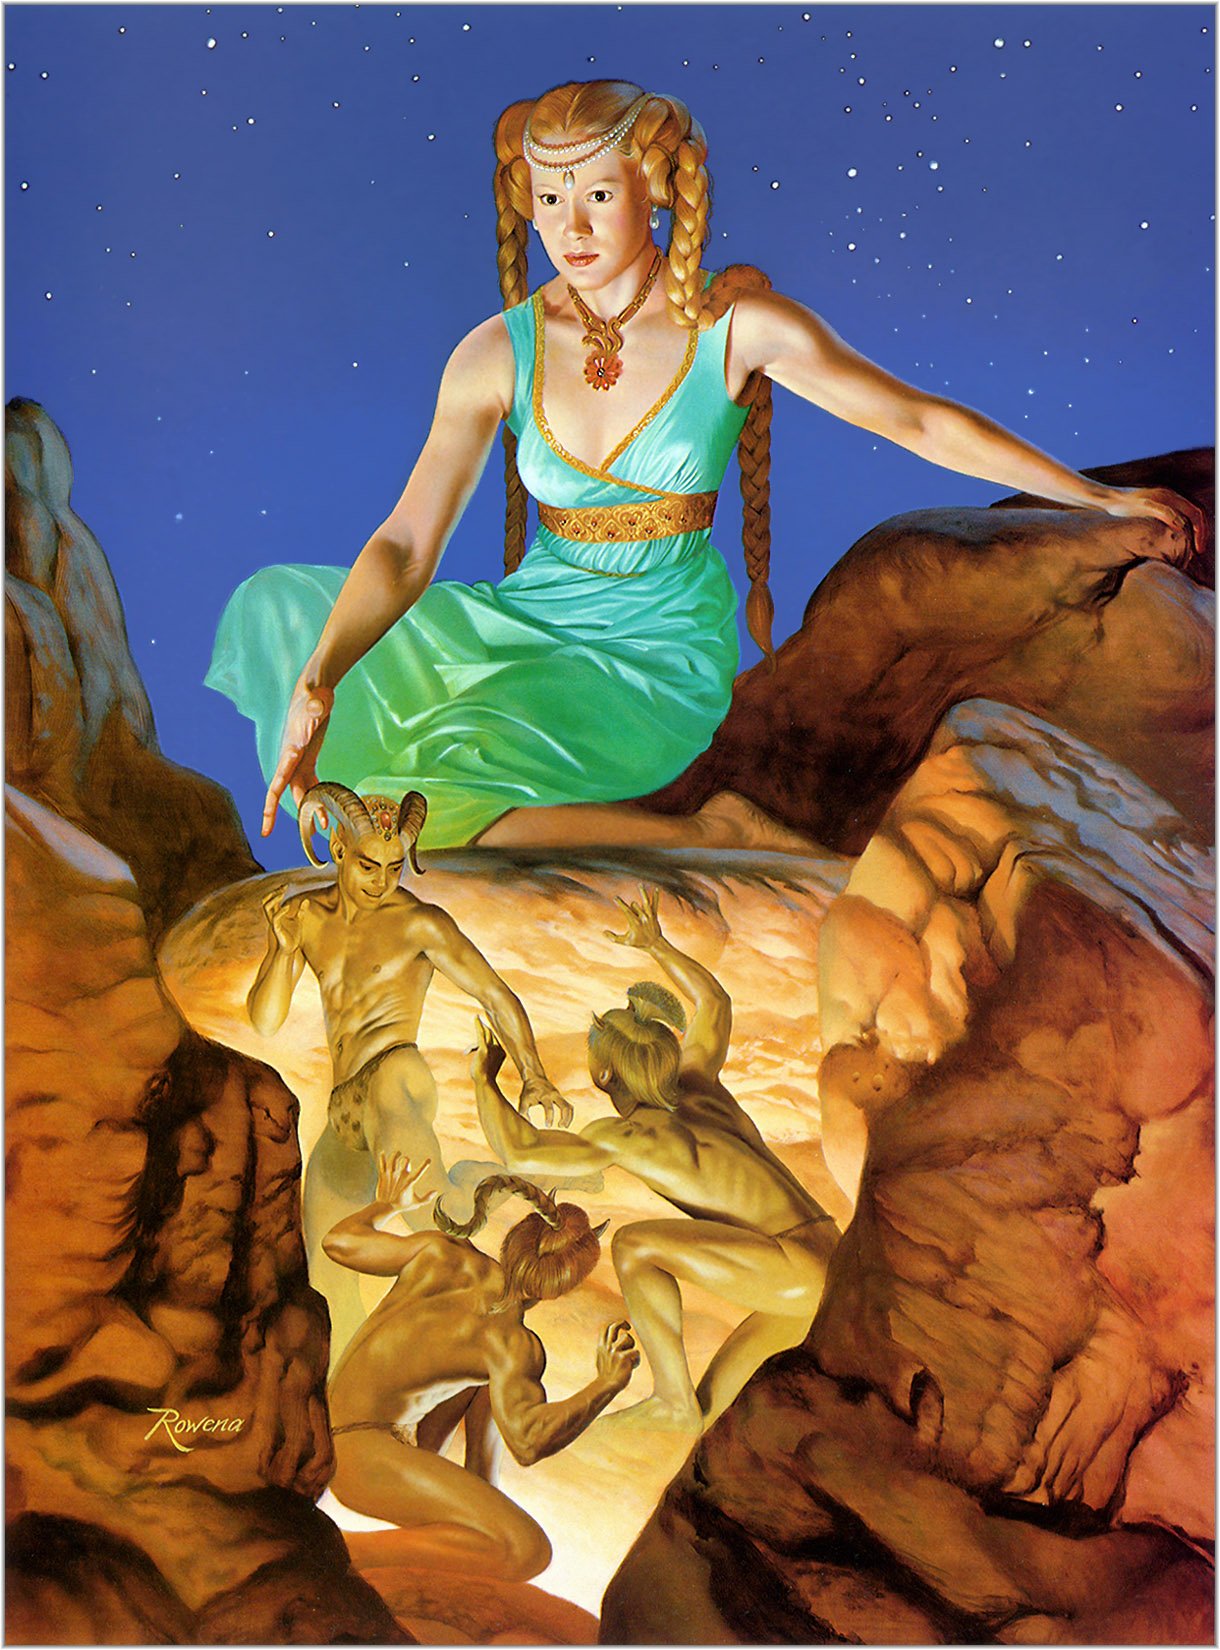 Rowena Morrill The Imps From Under the Rocks.